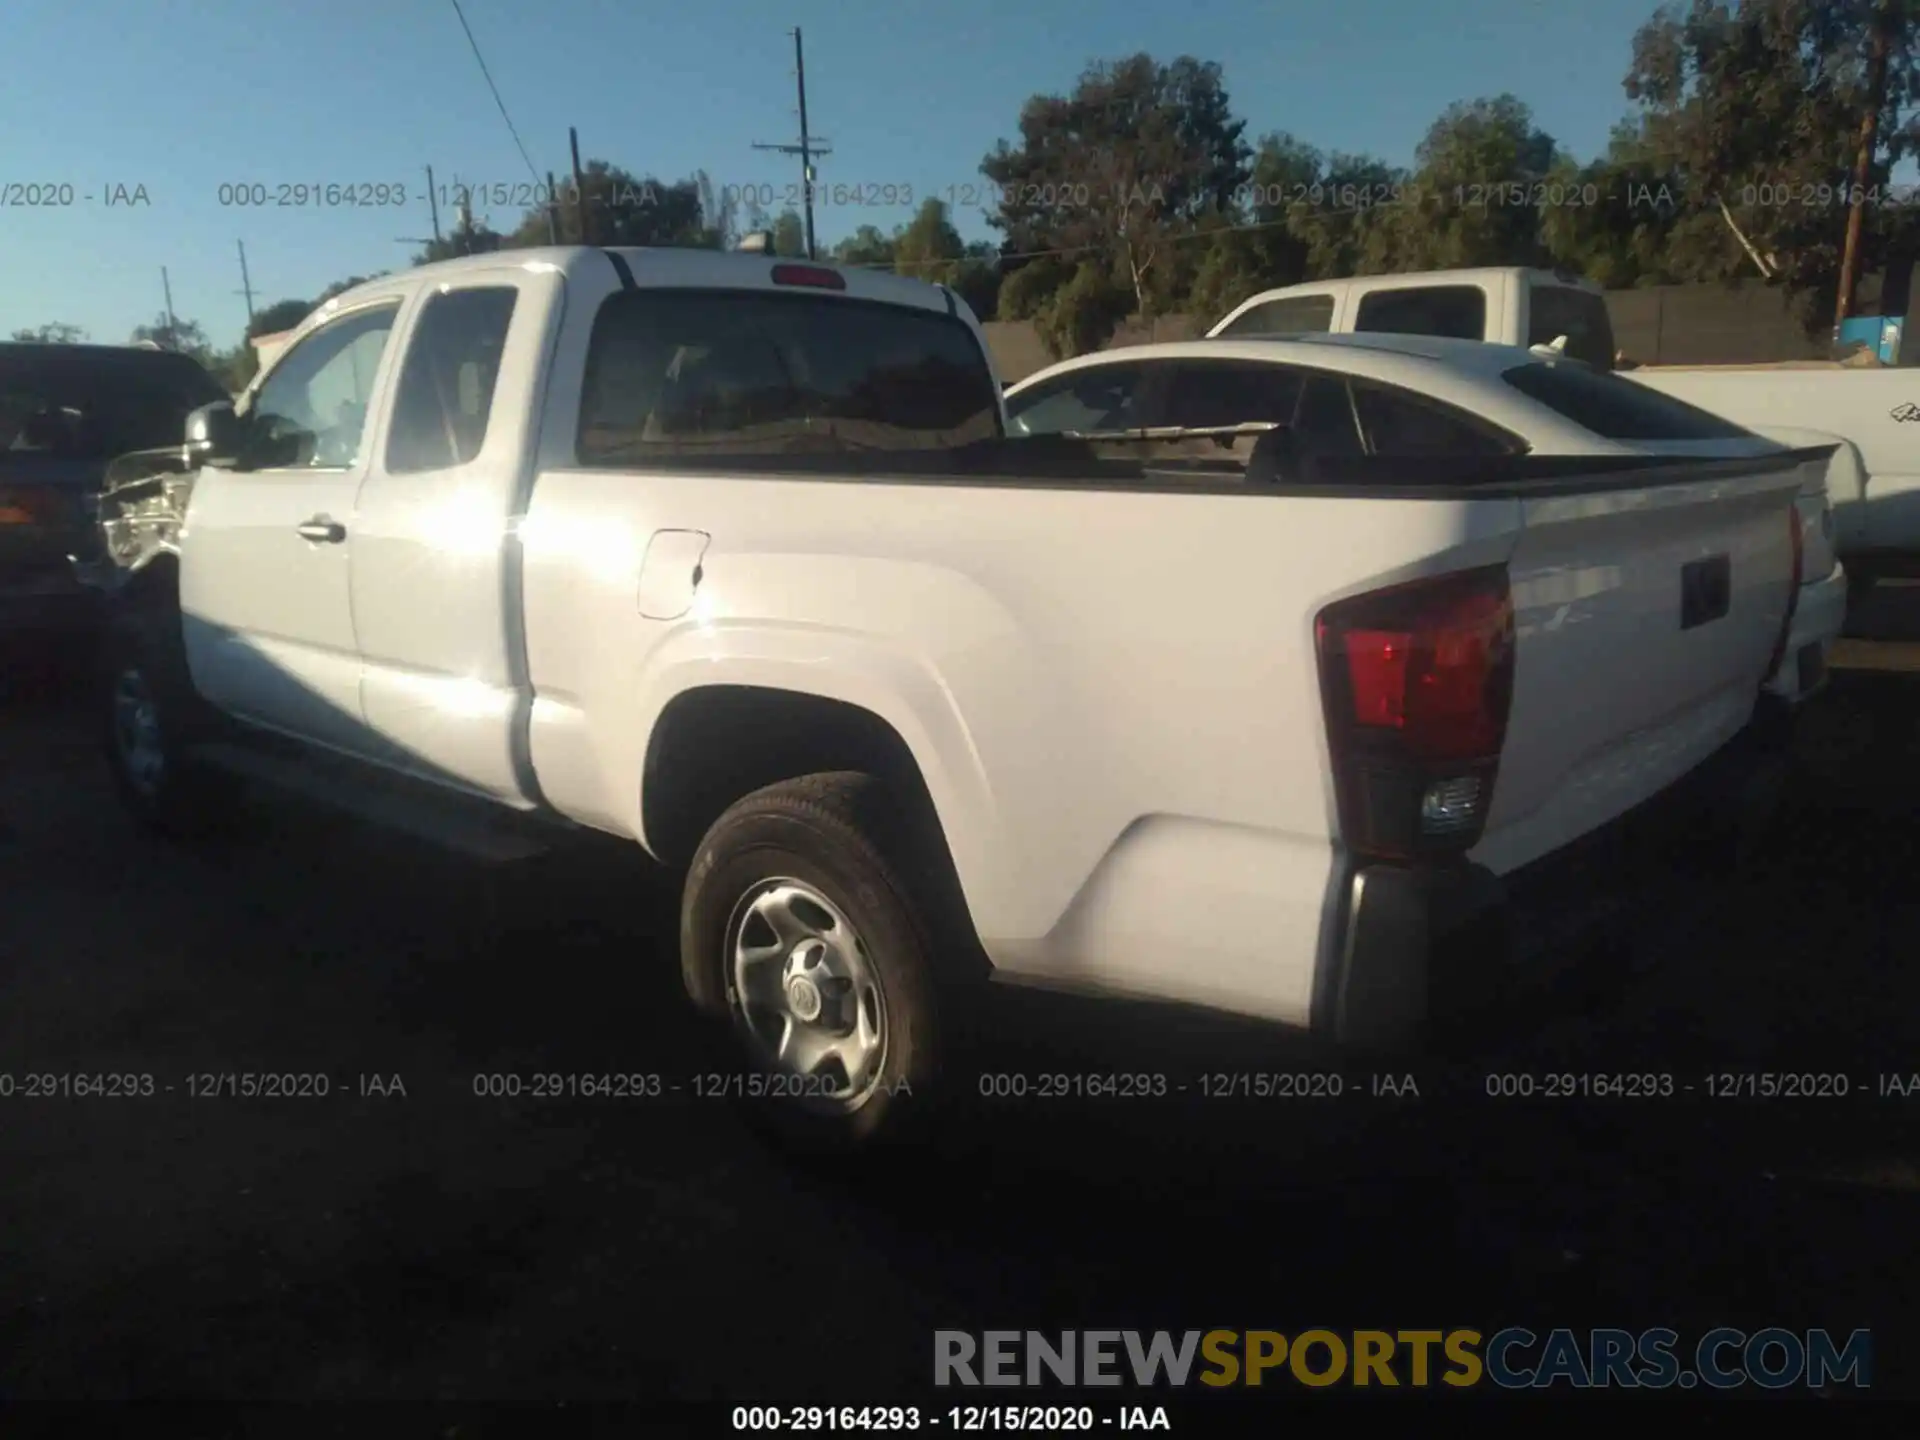 3 Photograph of a damaged car 5TFRX5GN4LX167670 TOYOTA TACOMA 2WD 2020